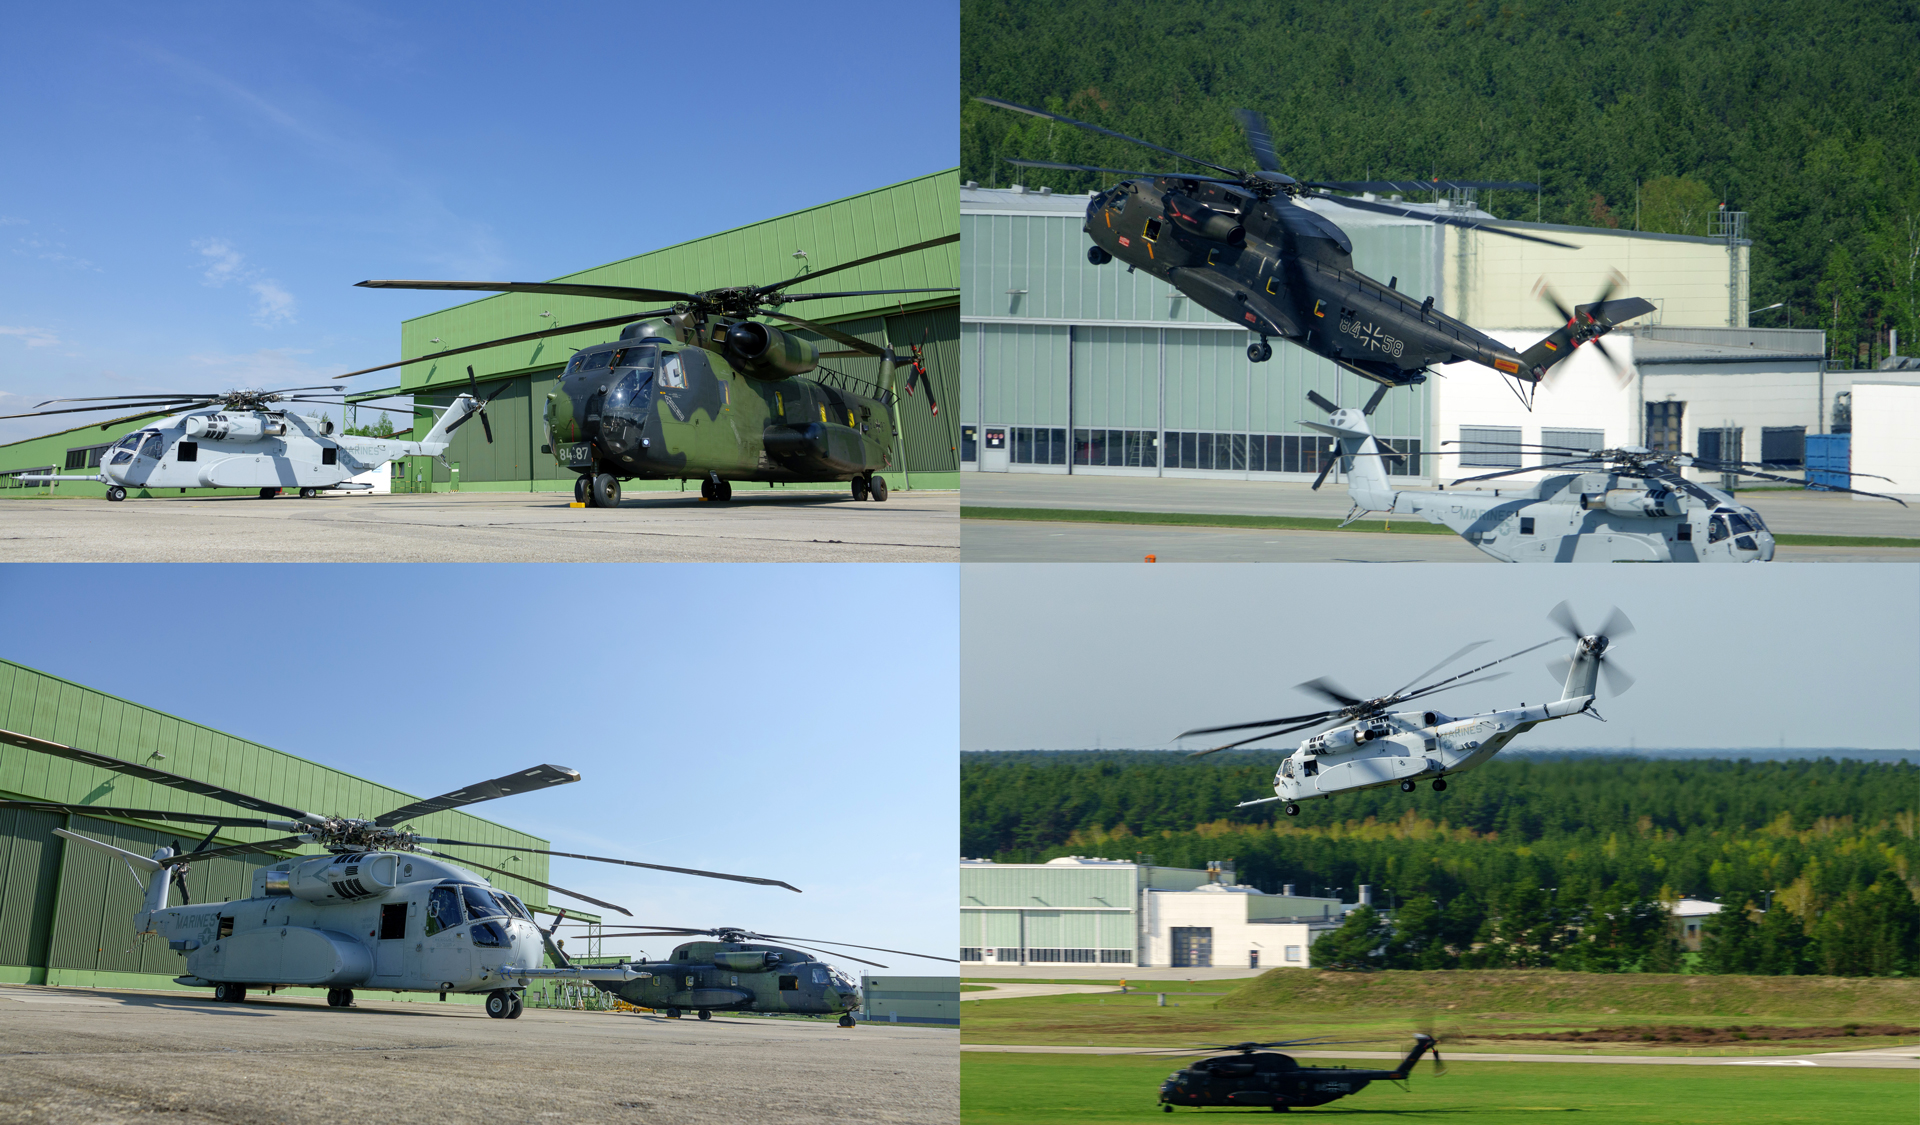 Sikorsky CH-53G and CH-53K operating side-by-side at Holzdorf Airbase in Germany.